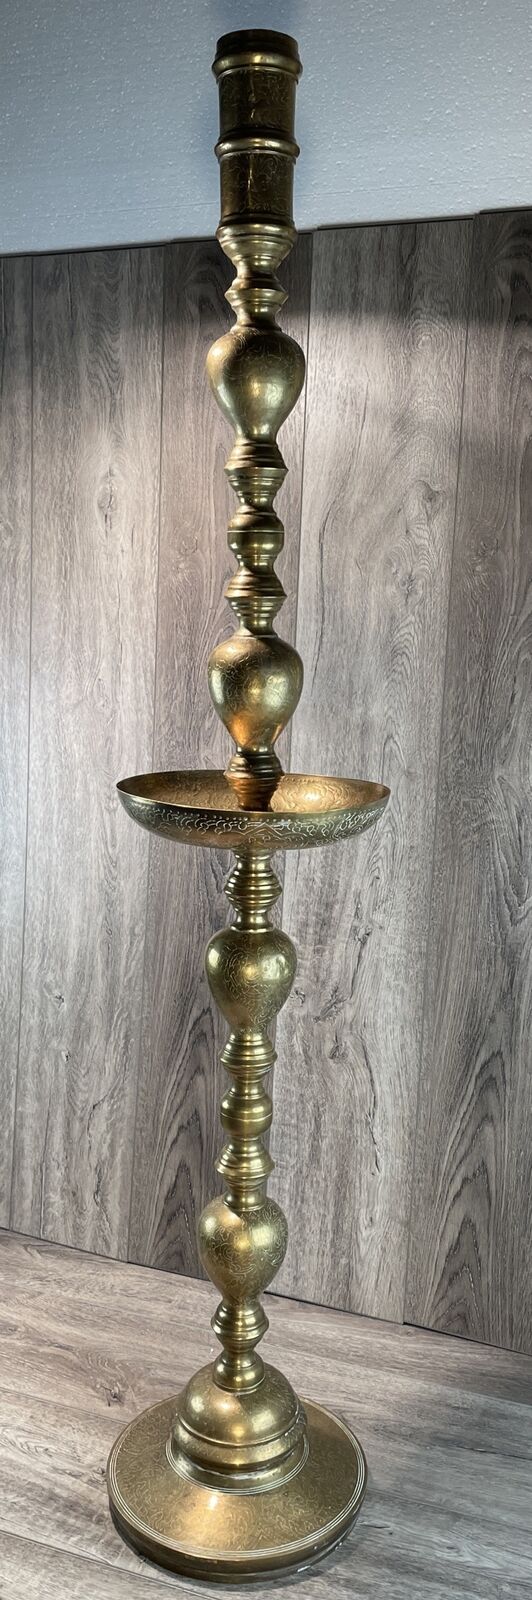 Giant Etched Brass Floor  Candlesticks Altar Prayer Candle Holders 50 Inch Tall